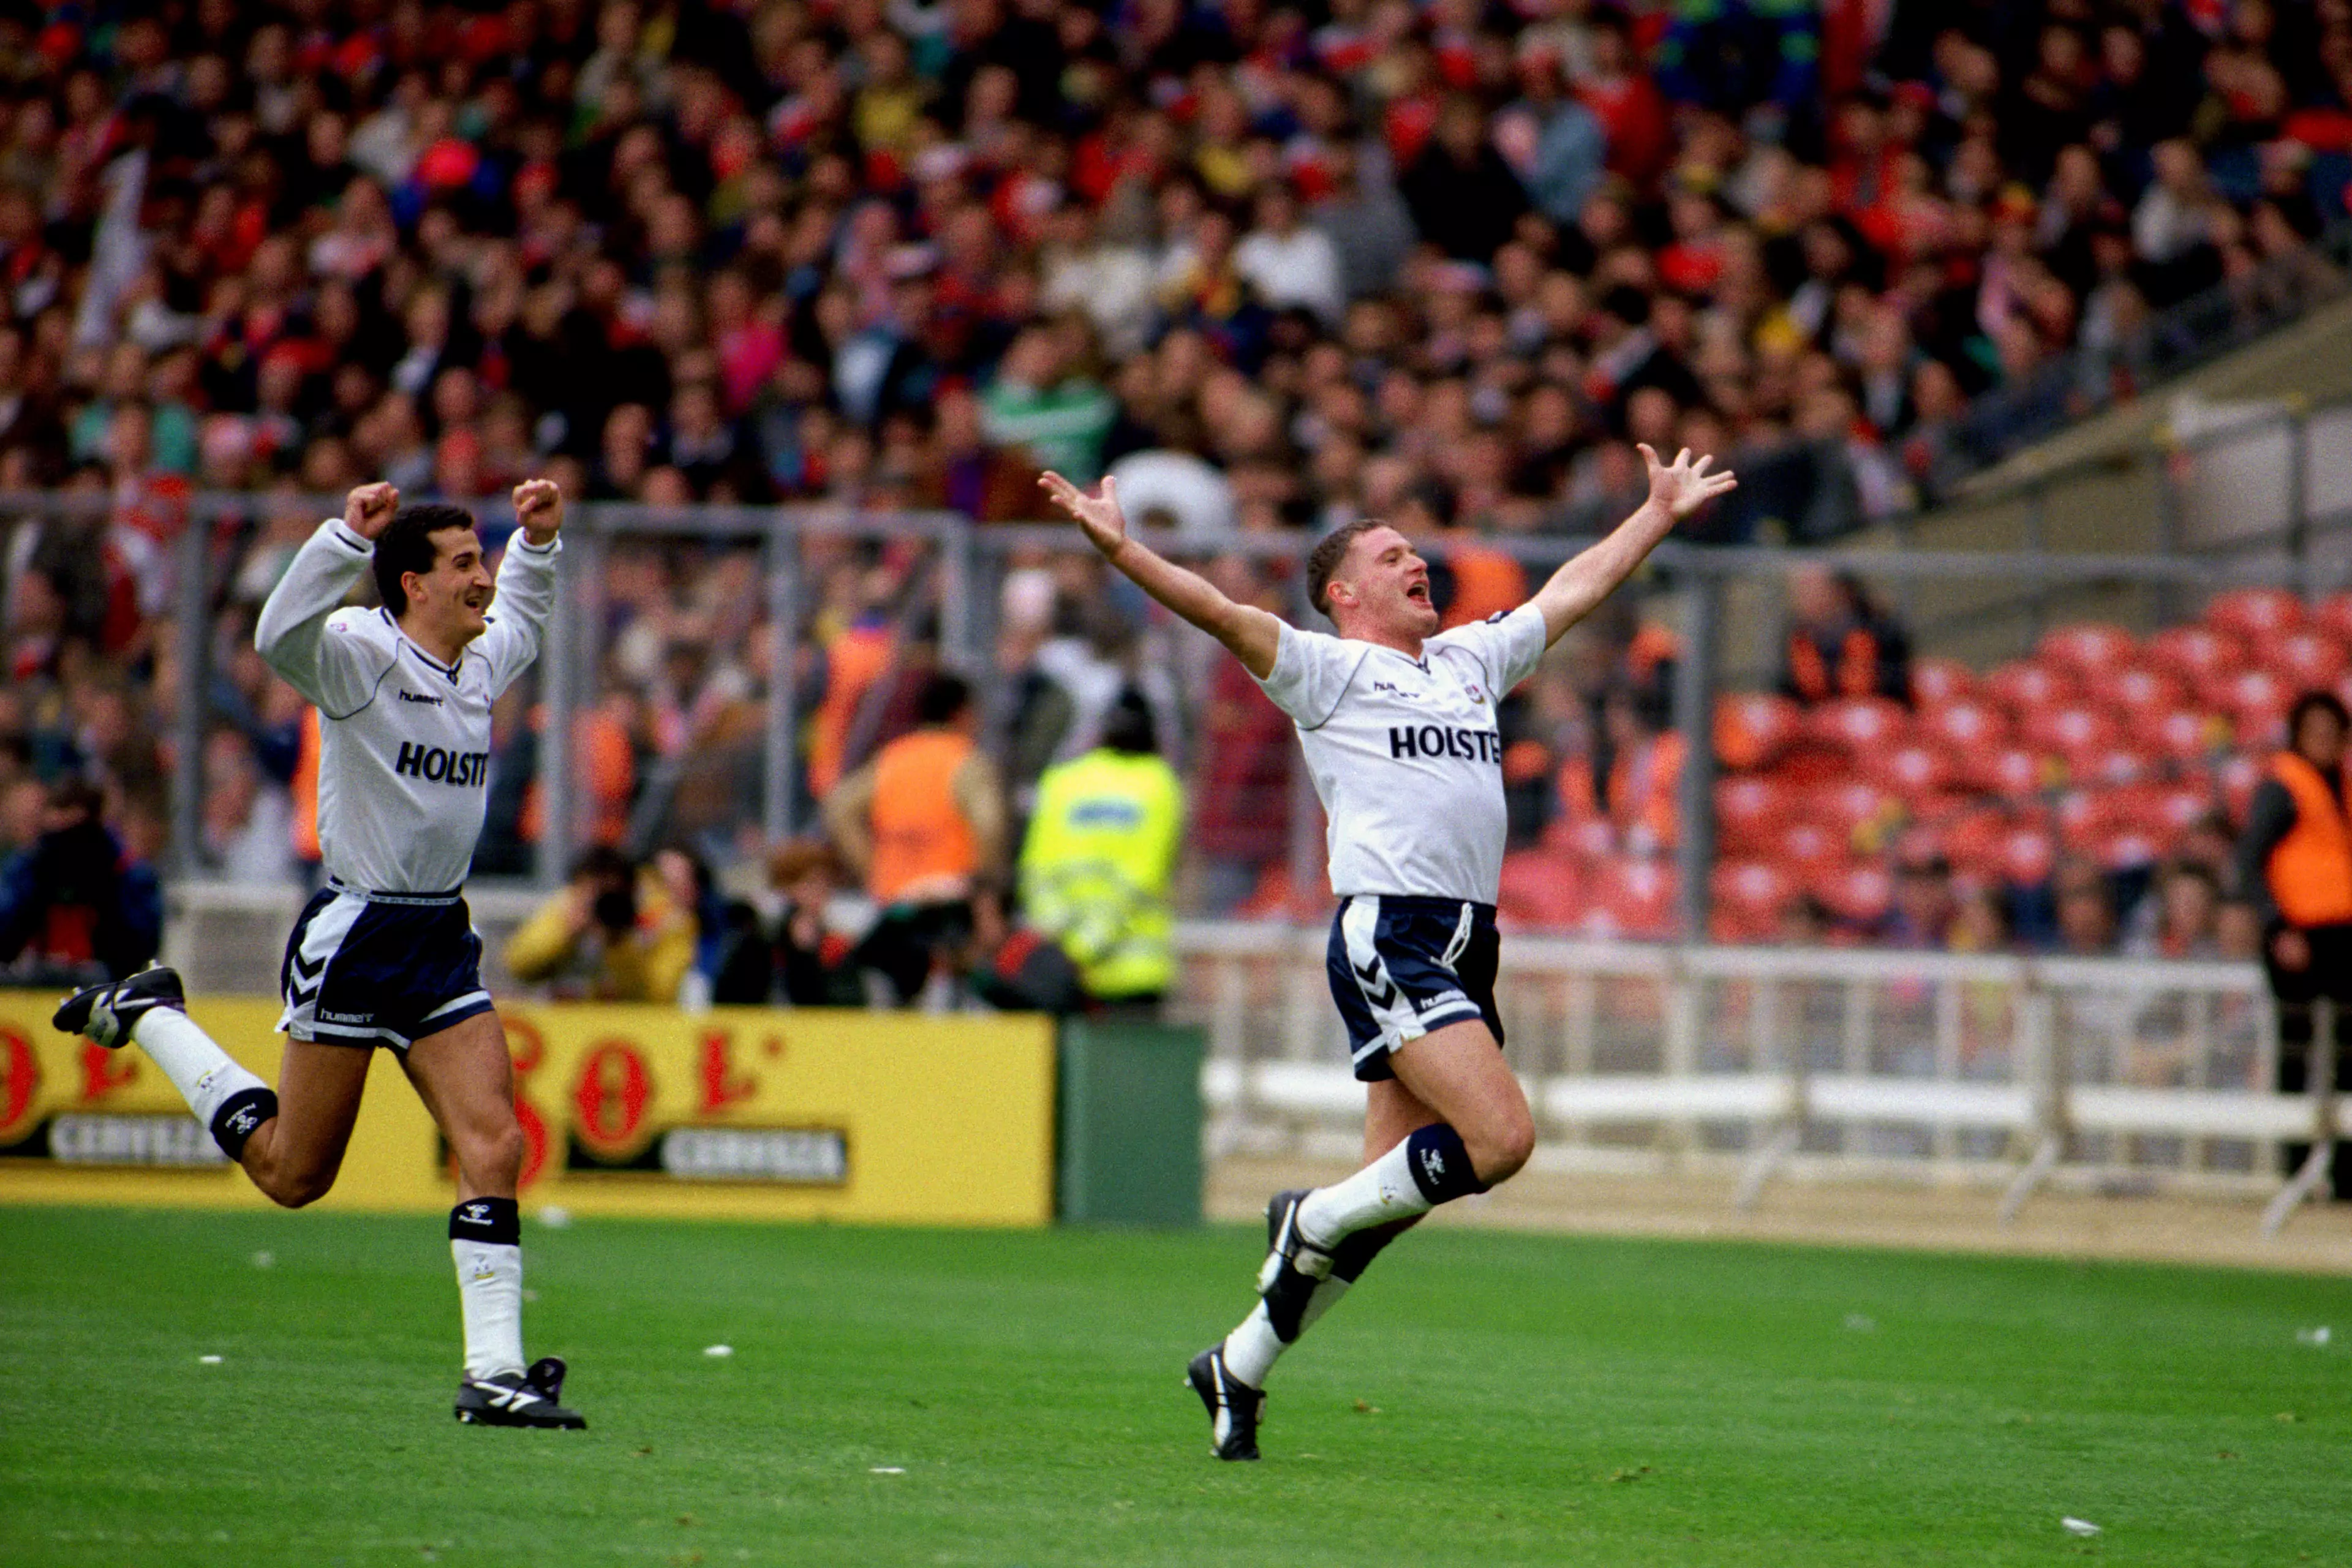 Gazza won the FA Cup with Spurs, beating Arsenal in the semi-final. Image: PA Images